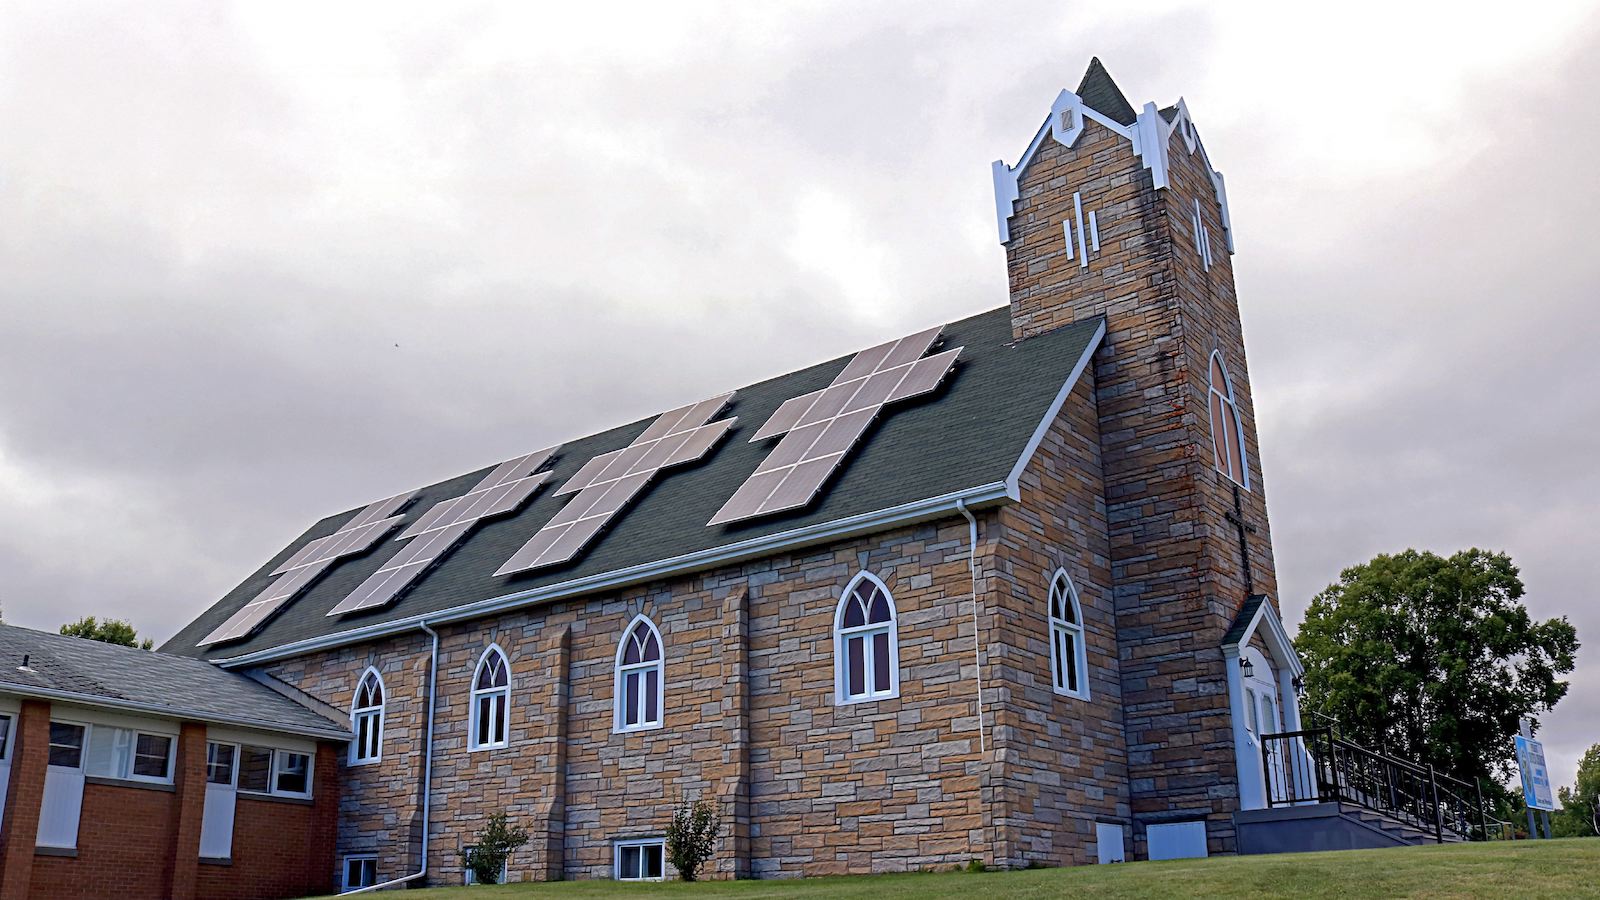 solar panels in the forms of crosses installed on the slanted roof of a Christian church